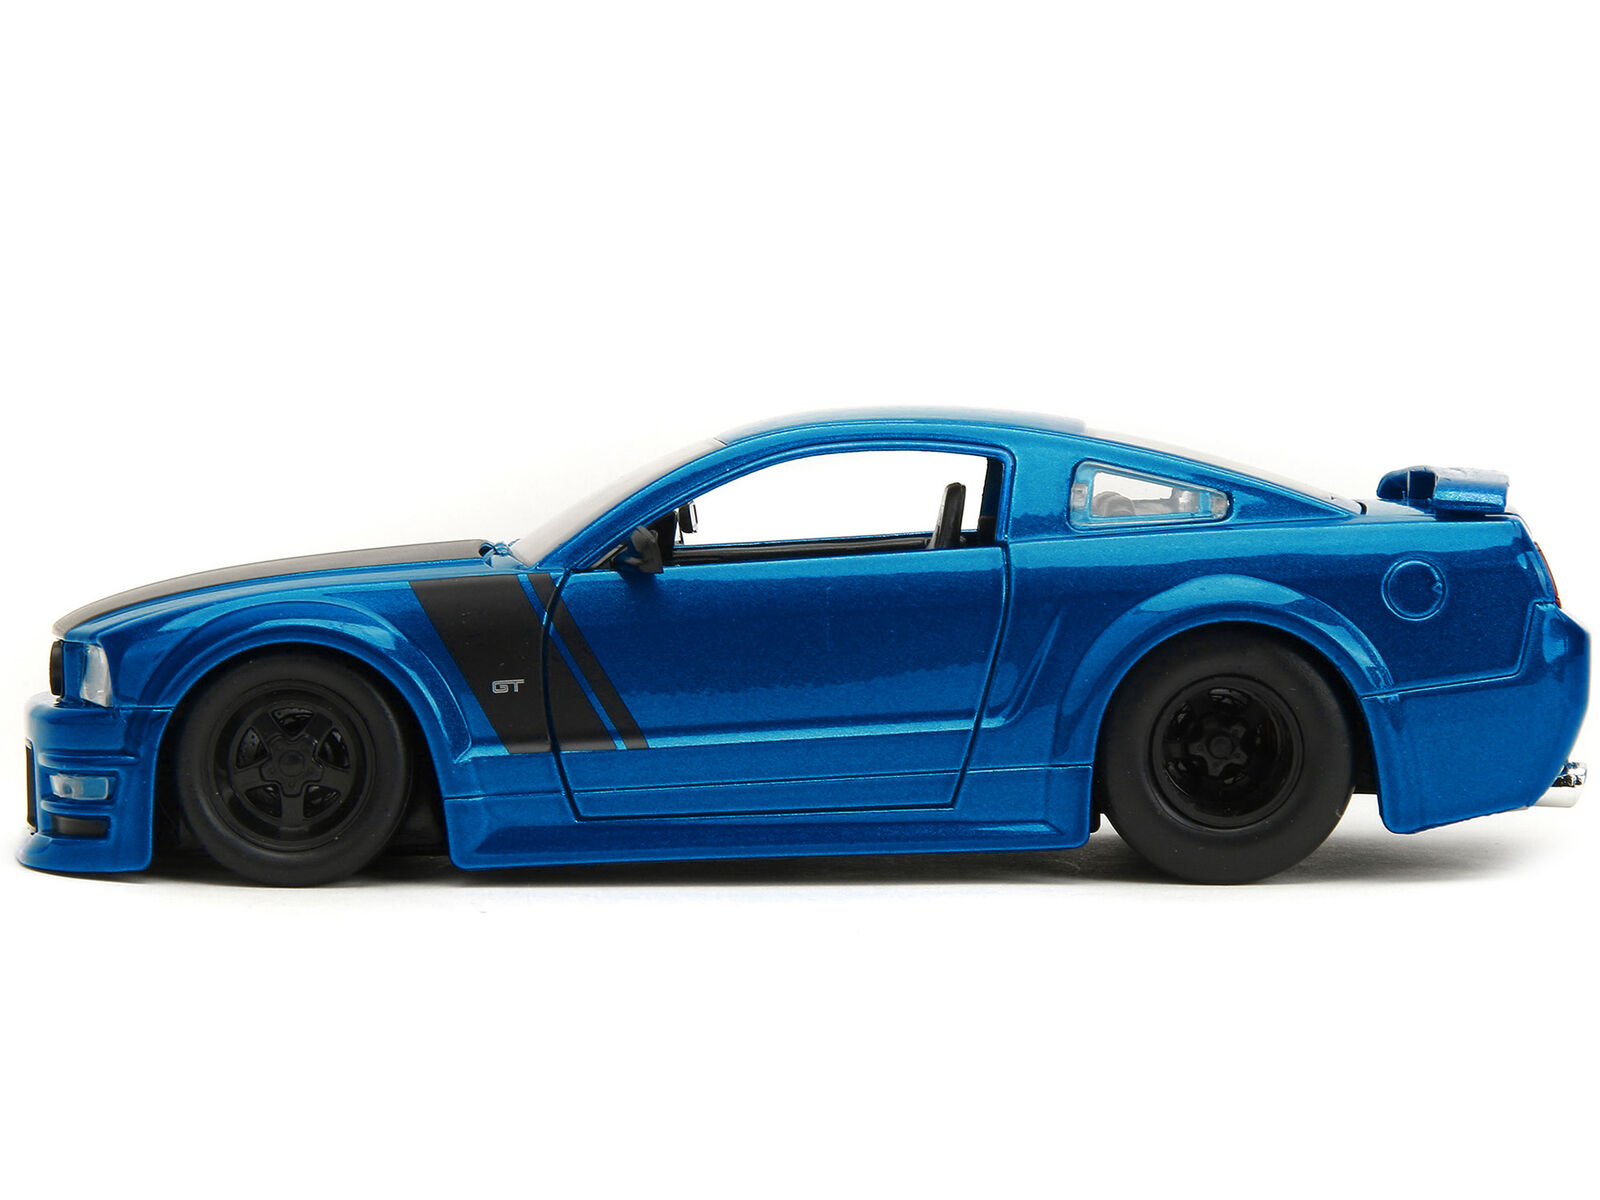 2006 Ford Mustang GT Blue Metallic with Matt Black Hood and Stripes \